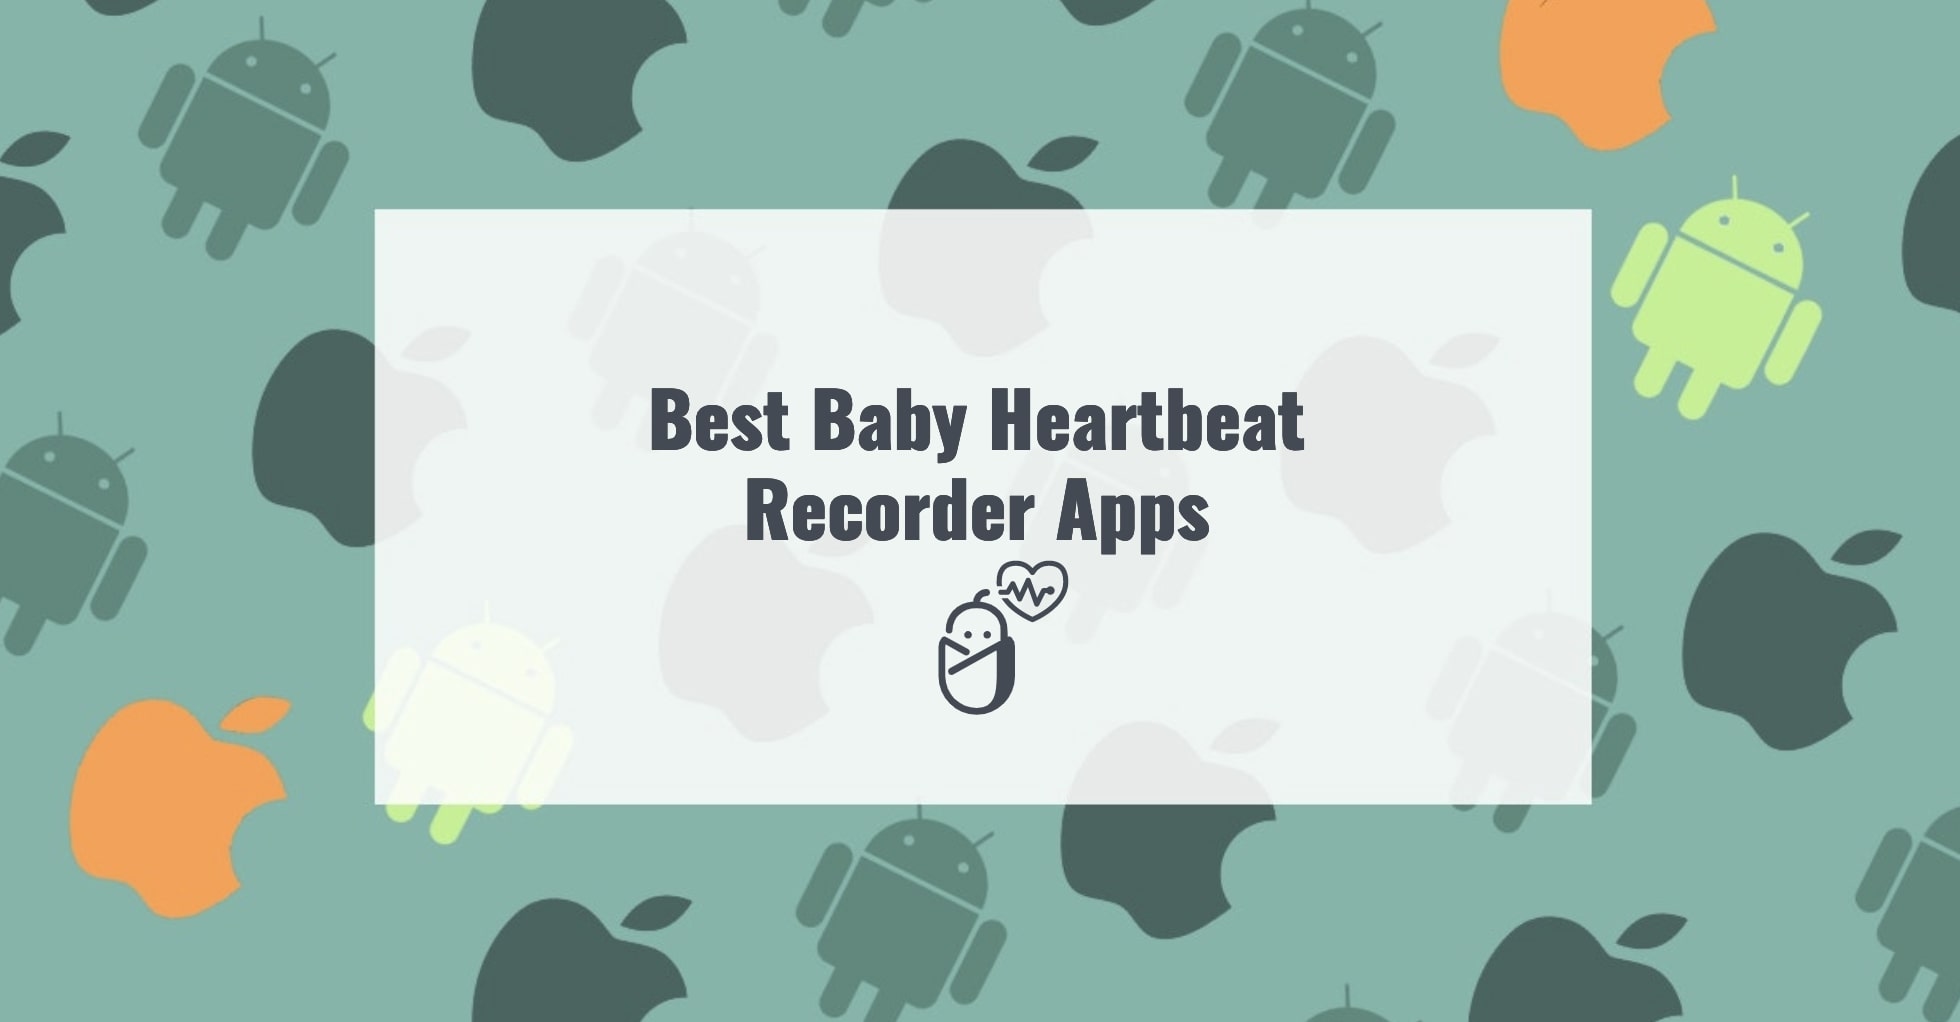 11 Best Baby Heartbeat Recorder Apps for Android & iOS